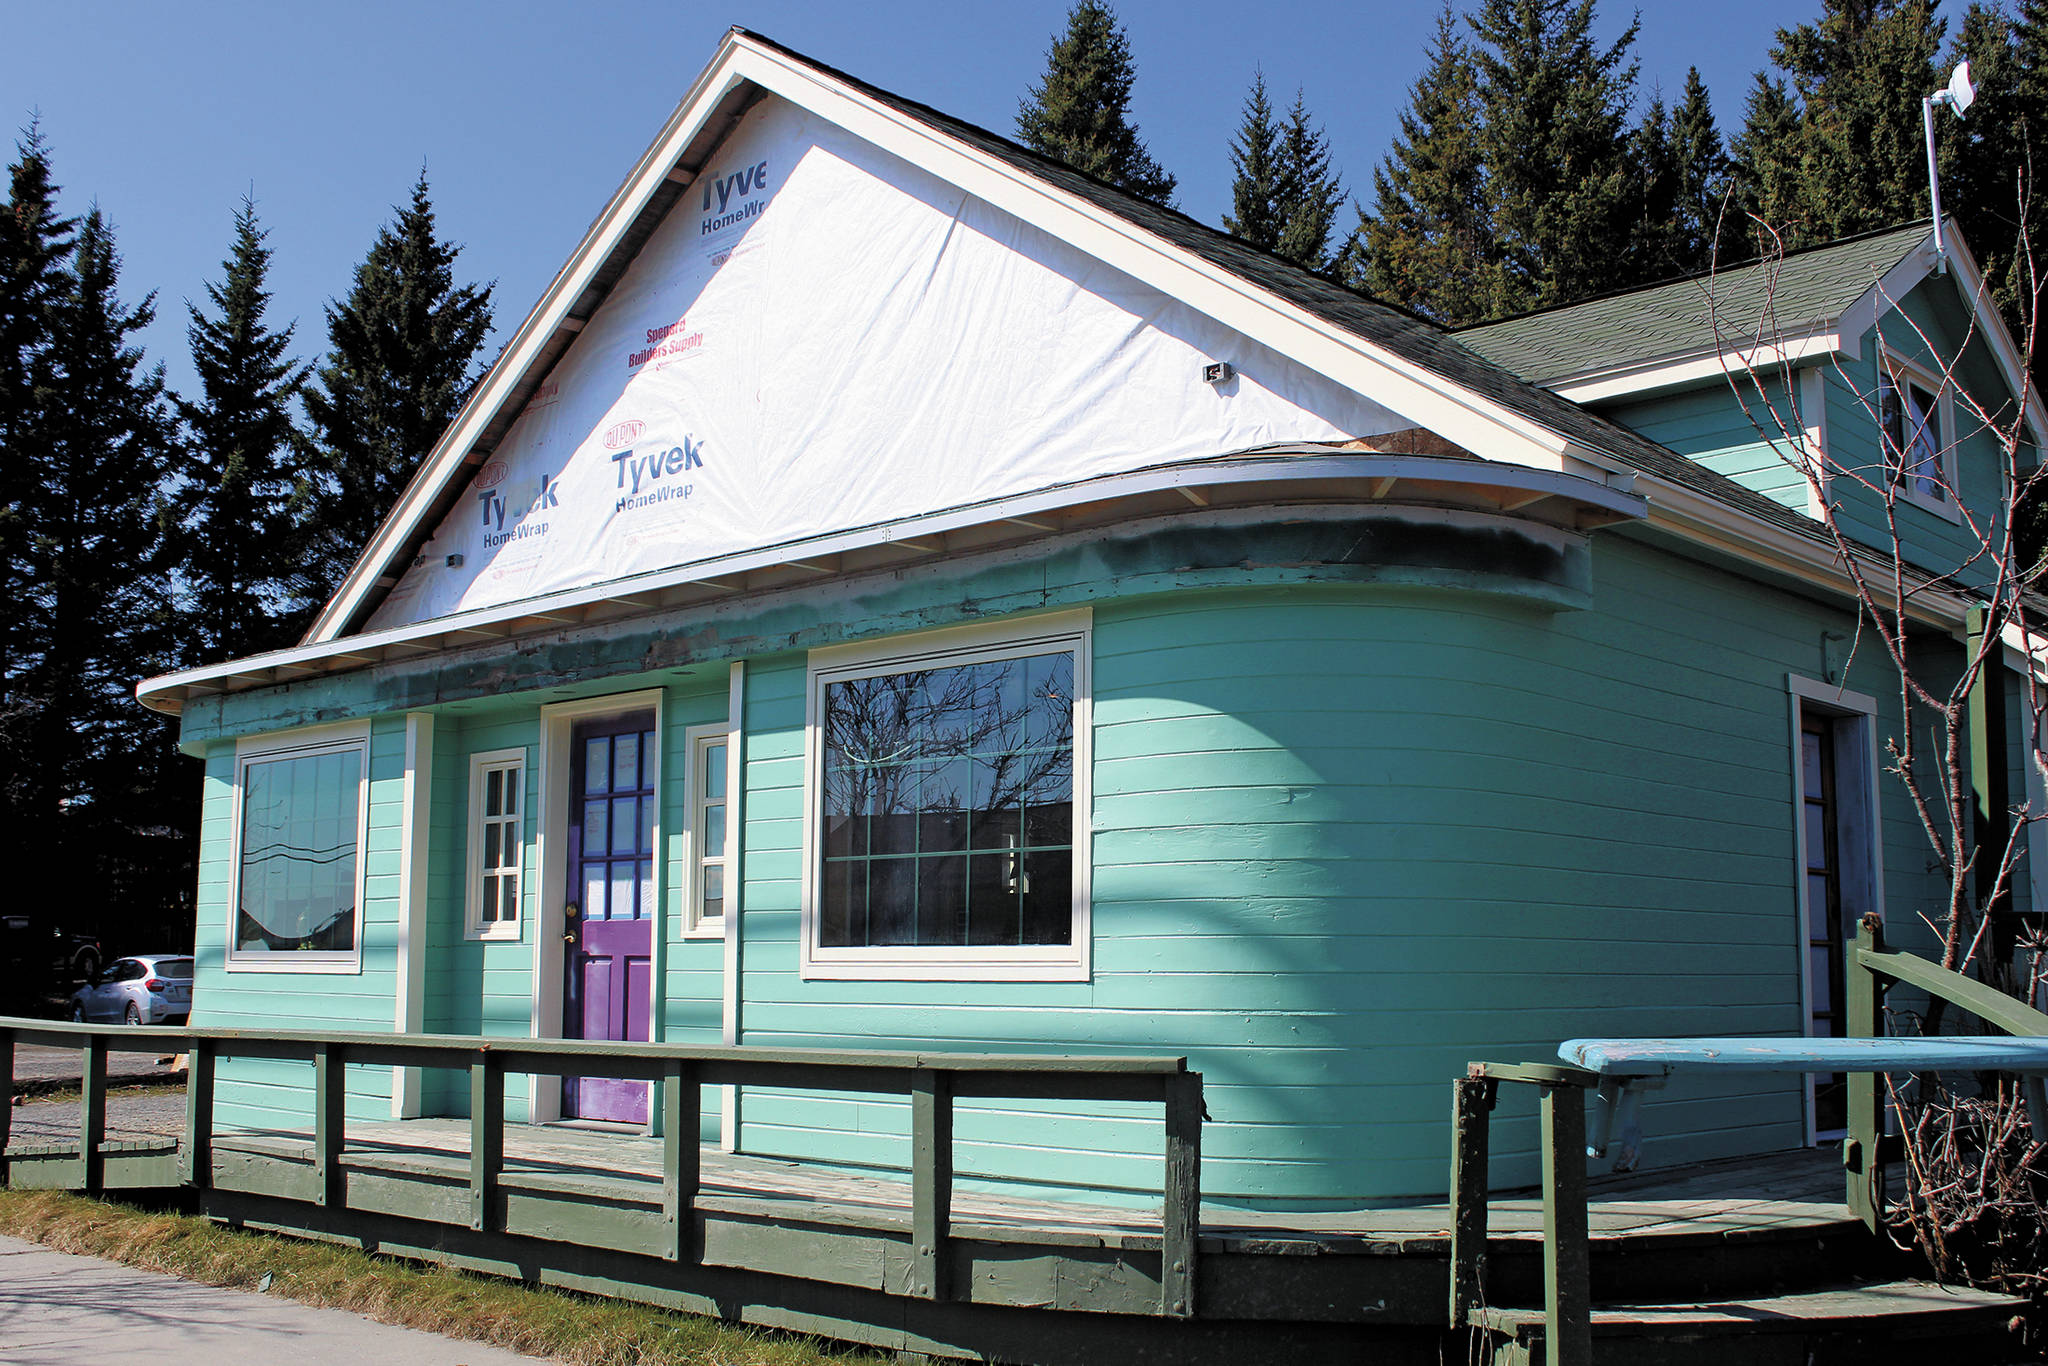 The Little Mermaid restaurant basks in a fresh coat of paint Tuesday, April 28, 2020 on Pioneer Avenue in Homer, Alaska. The restaurant is set to open in its new in-town location on May 1. (Photo by Megan Pacer/Homer News)